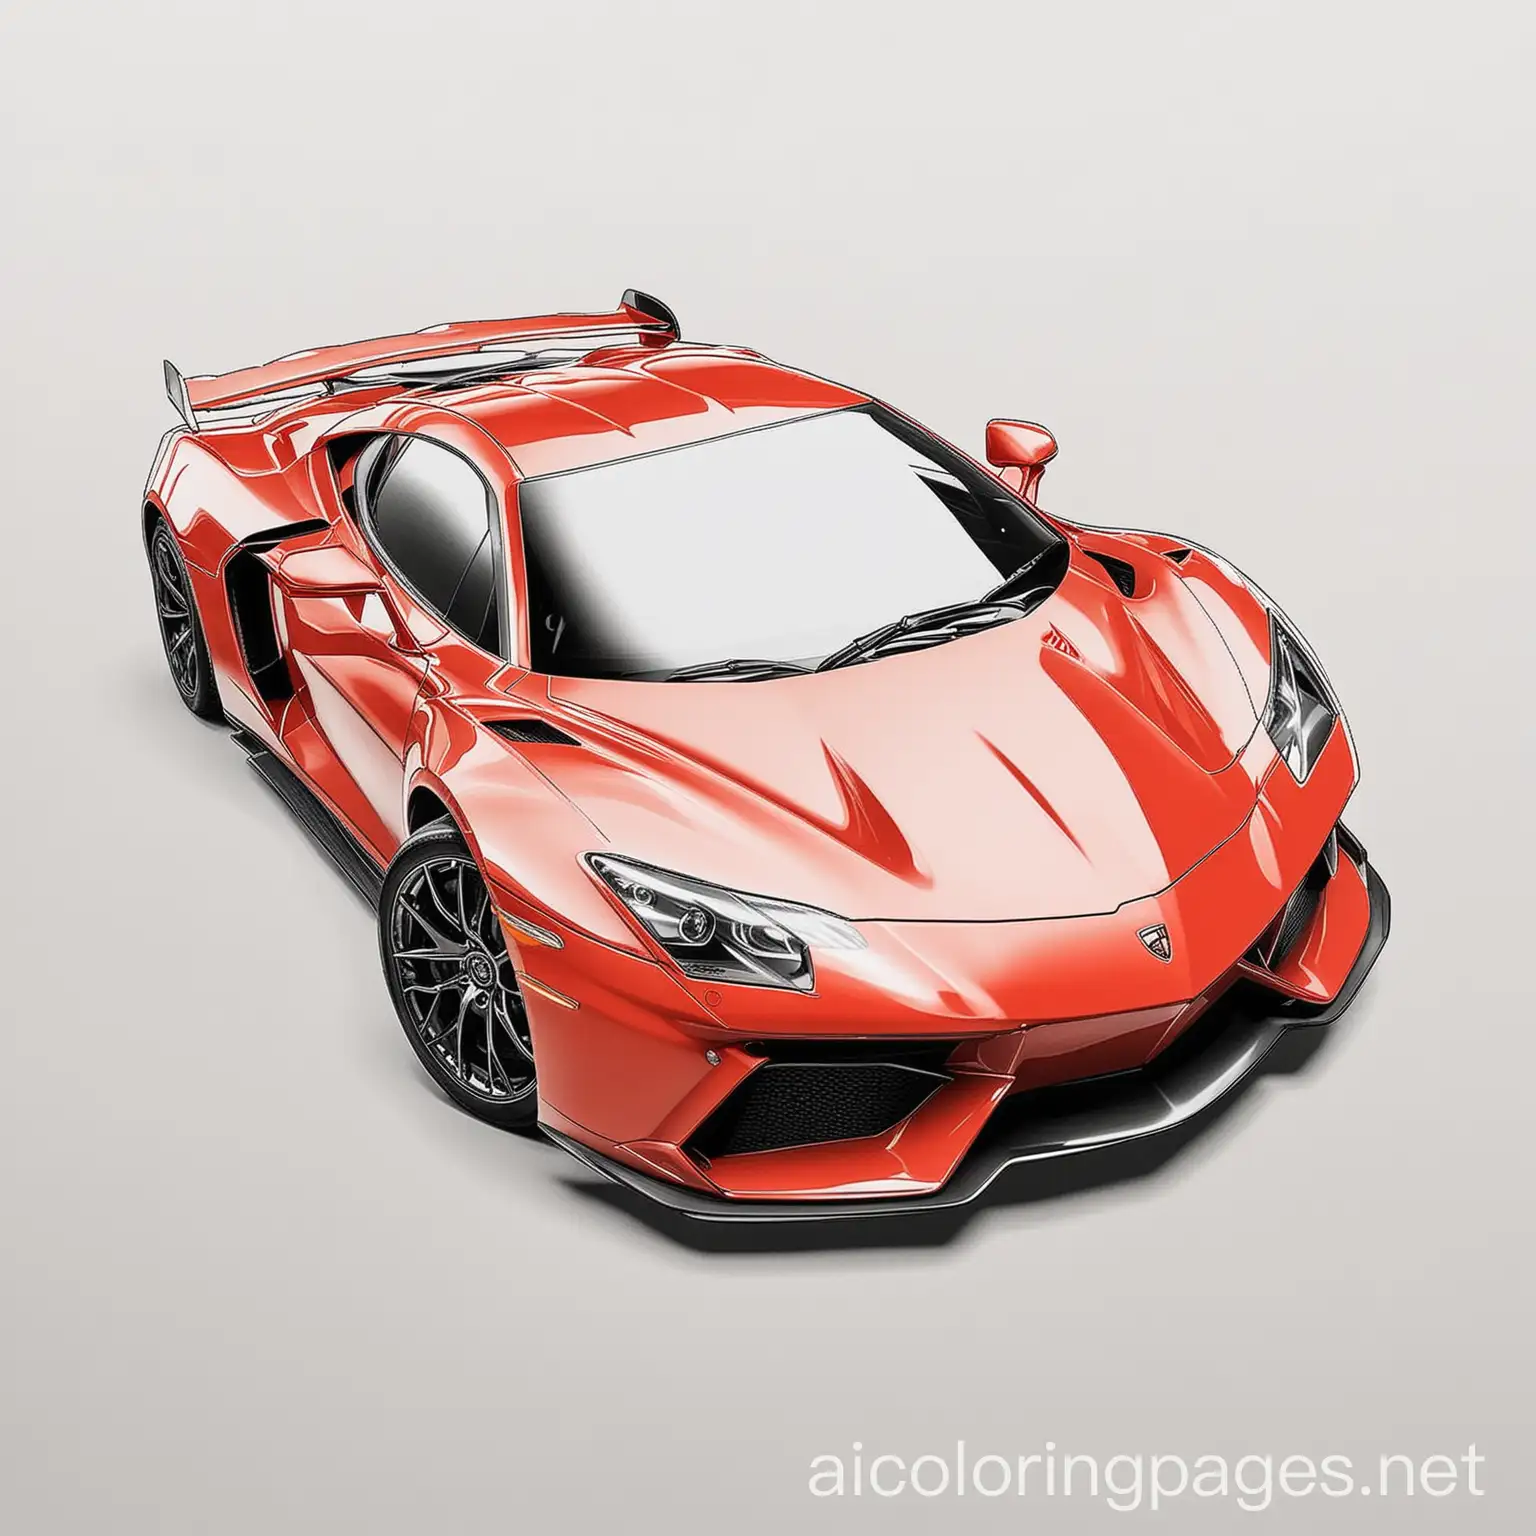 Red-Super-Car-Coloring-Page-Black-and-White-Line-Art-on-White-Background